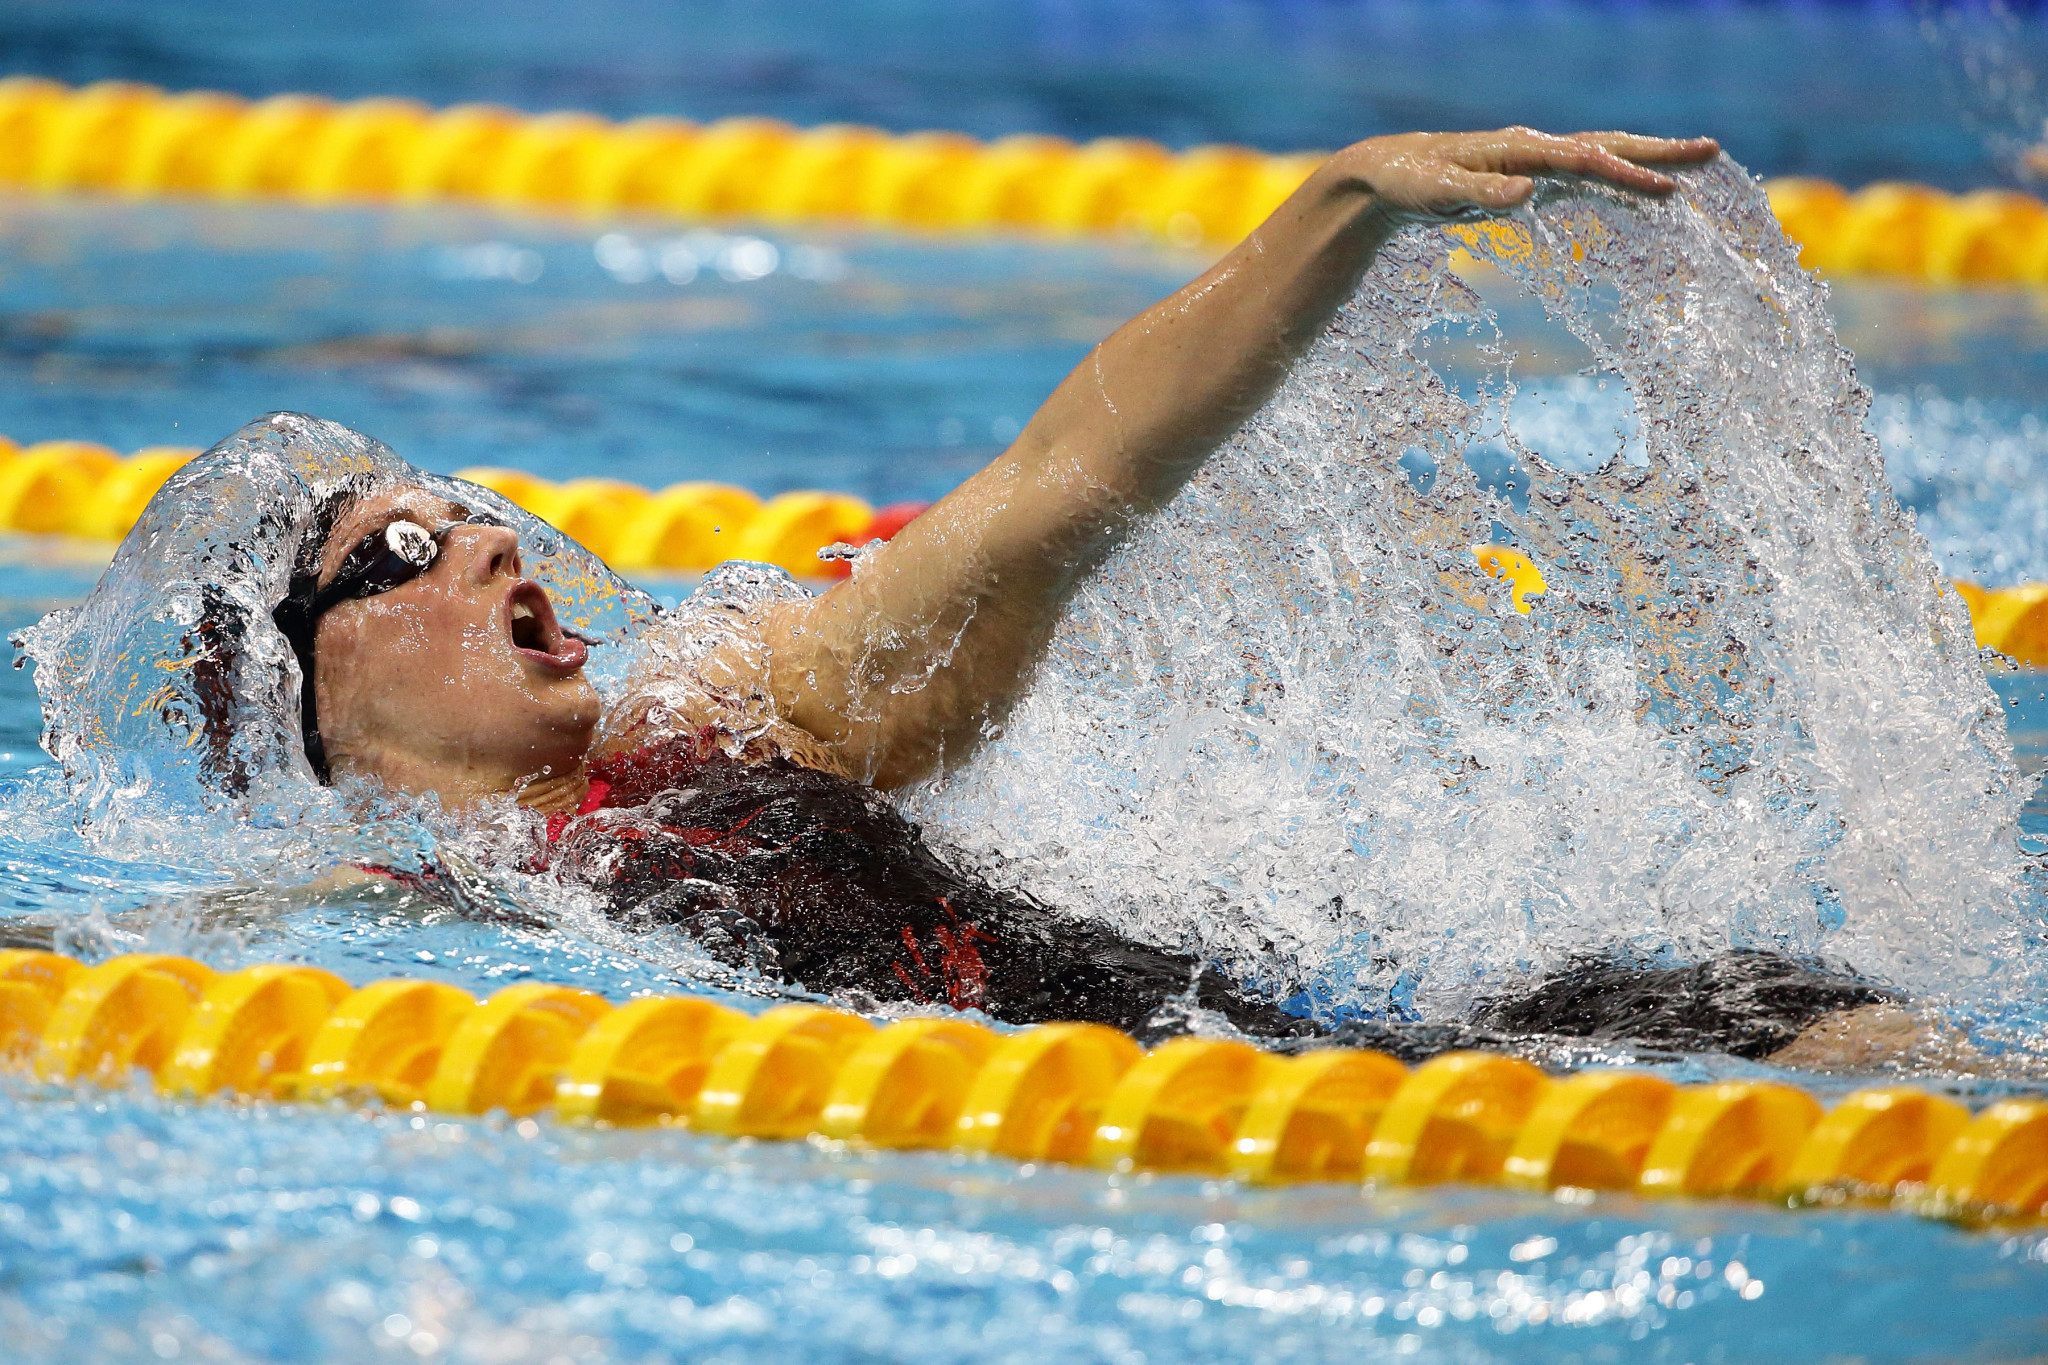 Hungary's Katinka Hosszú was in fine form once again today ©Getty Images